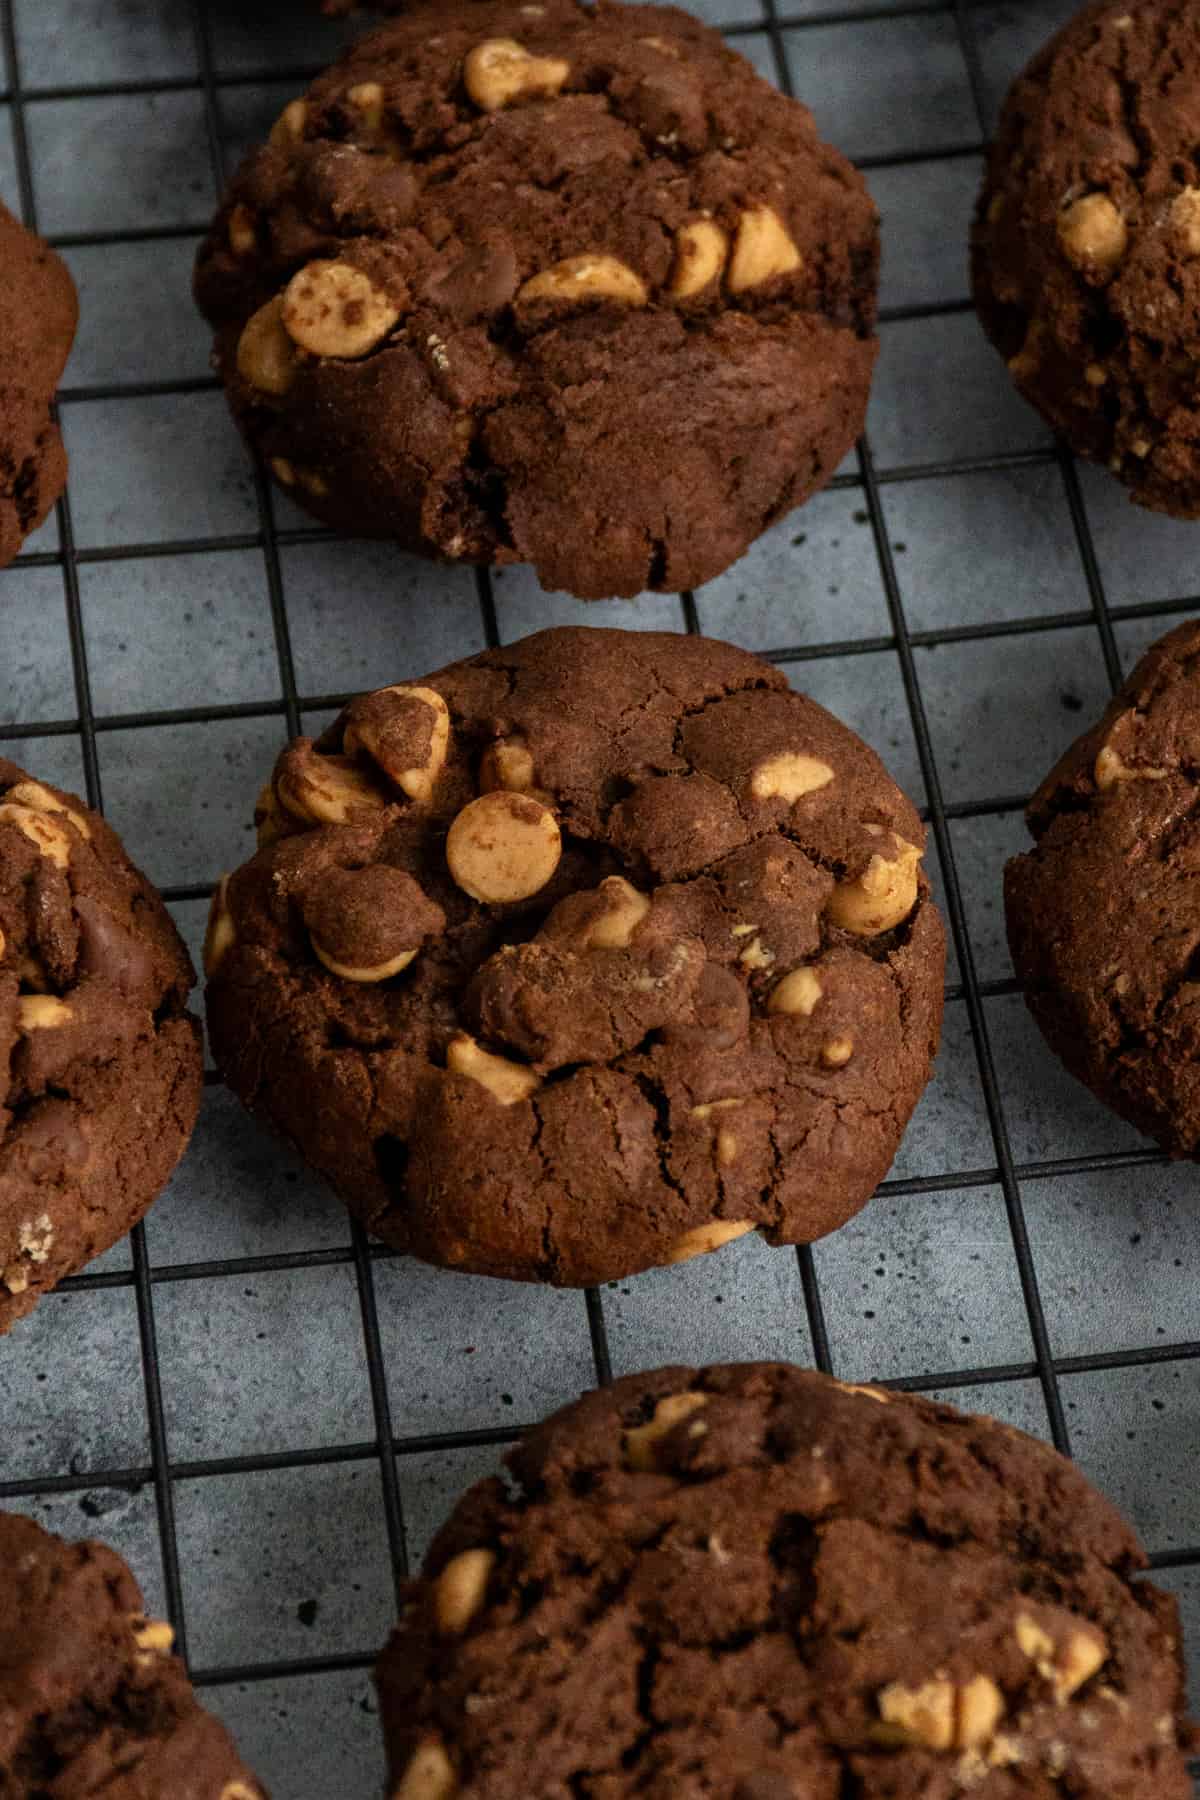 Close-up of a chocolate peanut butter chip cookie on a cooling rack.